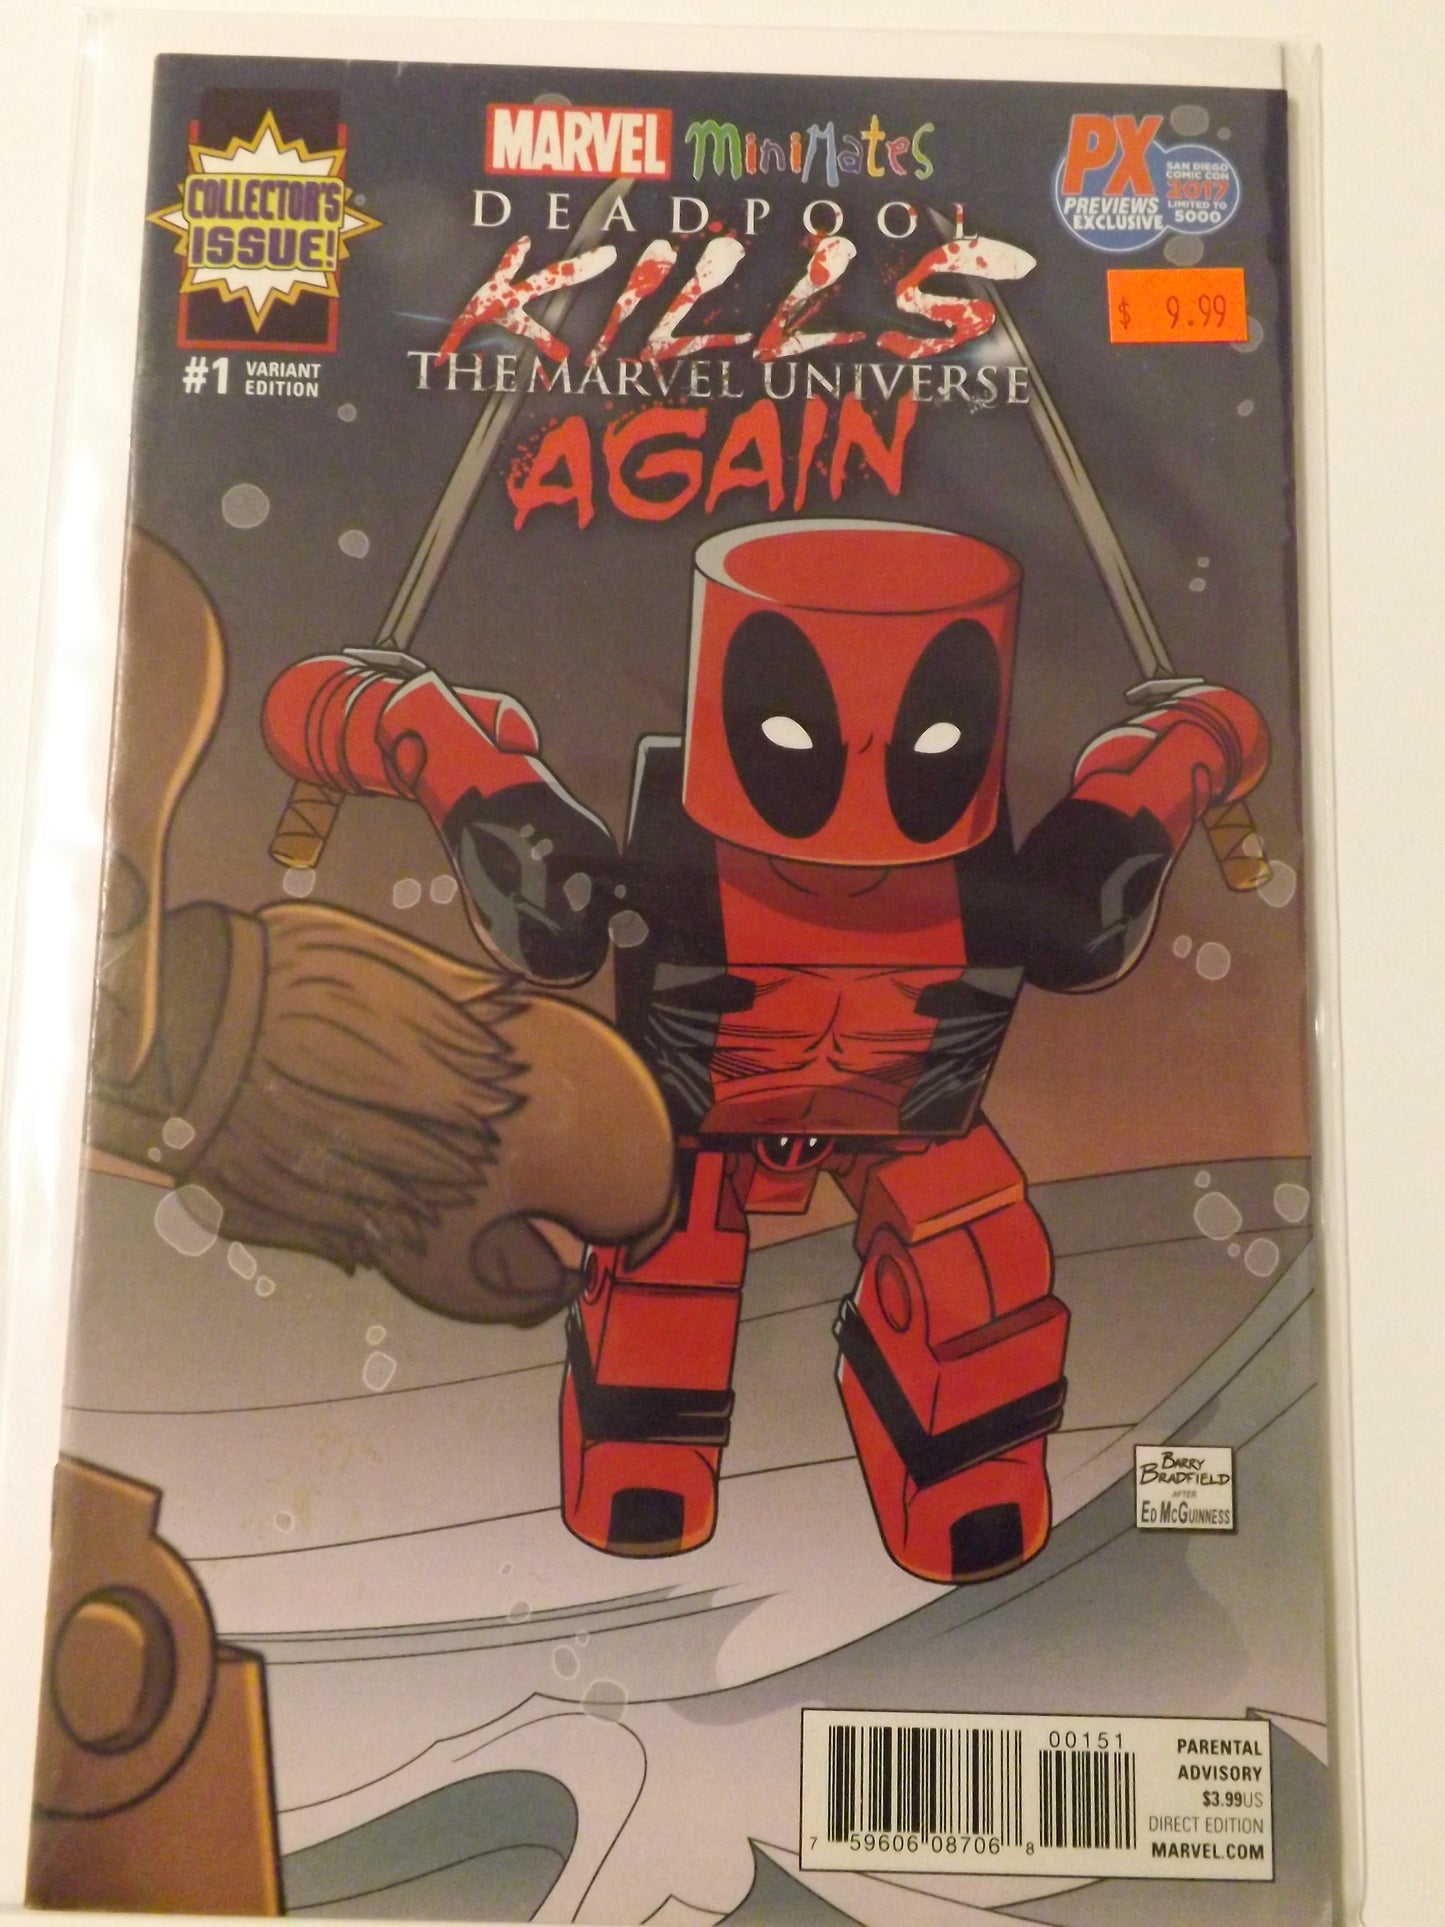 Deadpool Kills The Marvel Universe Again #1 Previews Exclusive/SDCC Variant